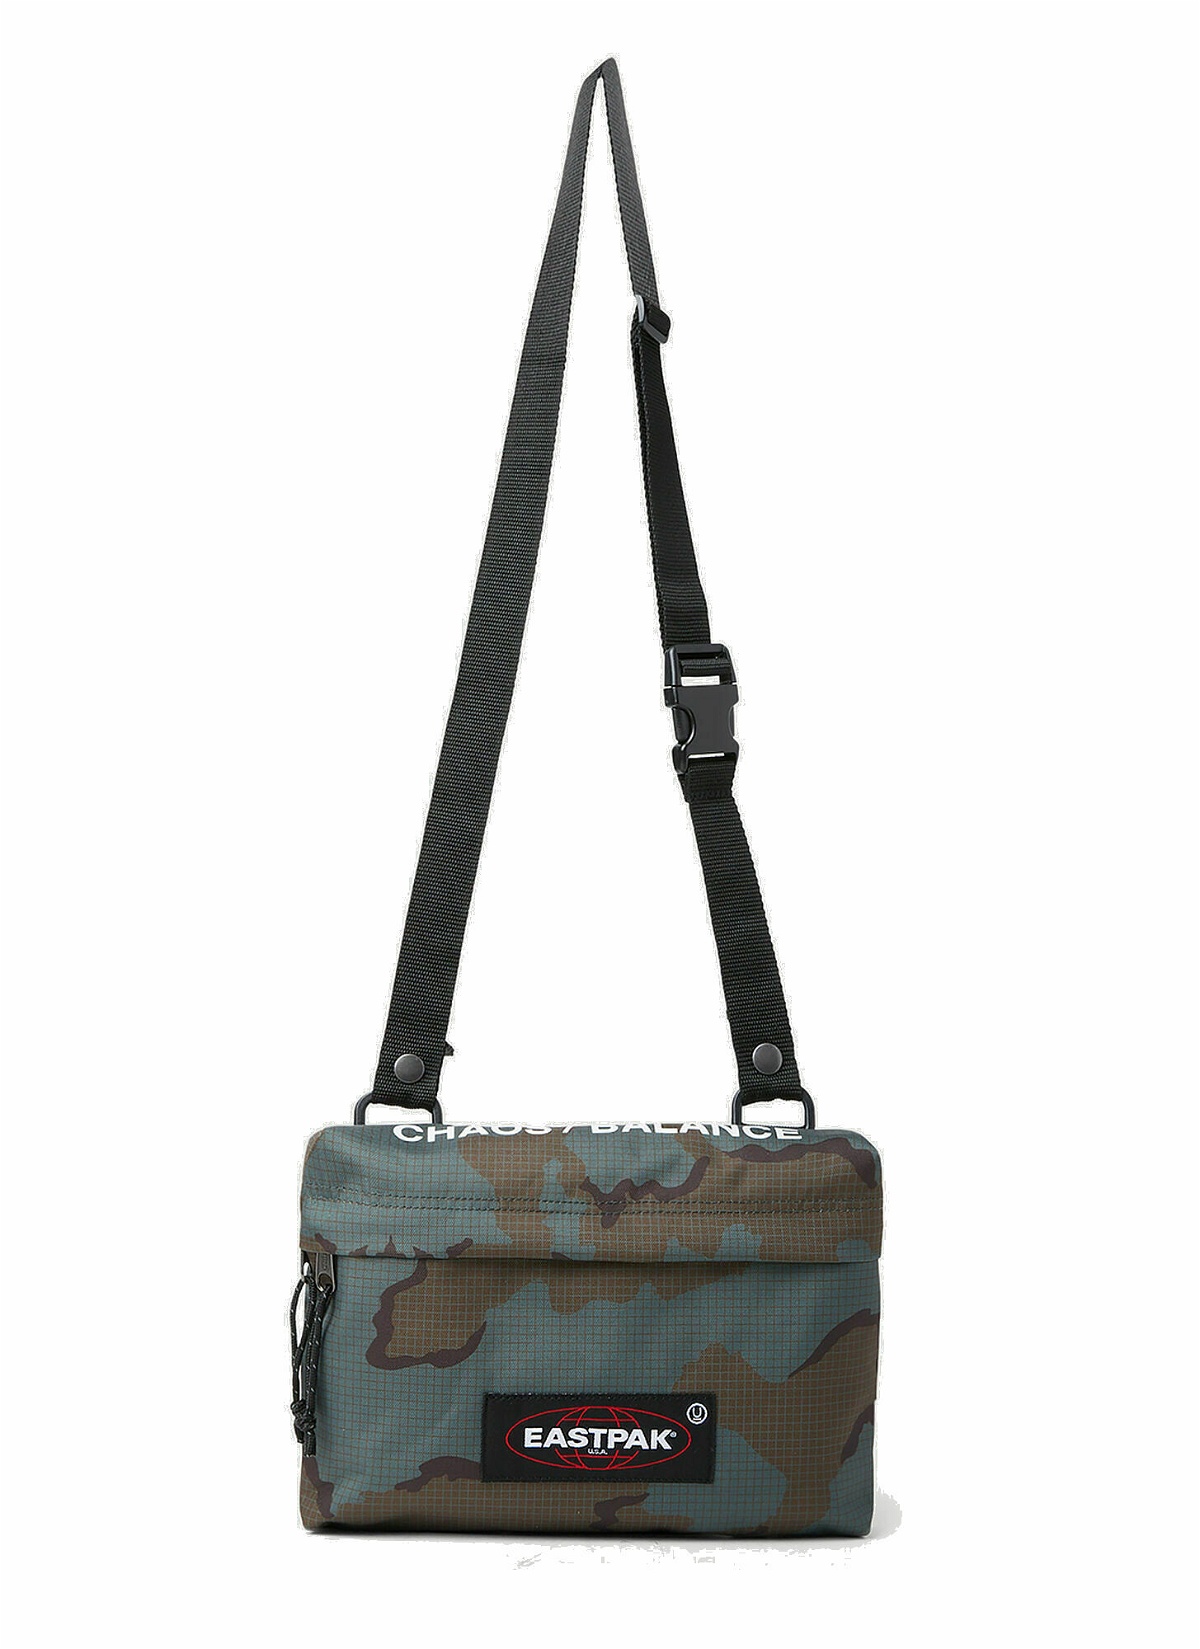 Eastpak x UNDERCOVER - Camouflage Crossbody Bag in Blue Undercover